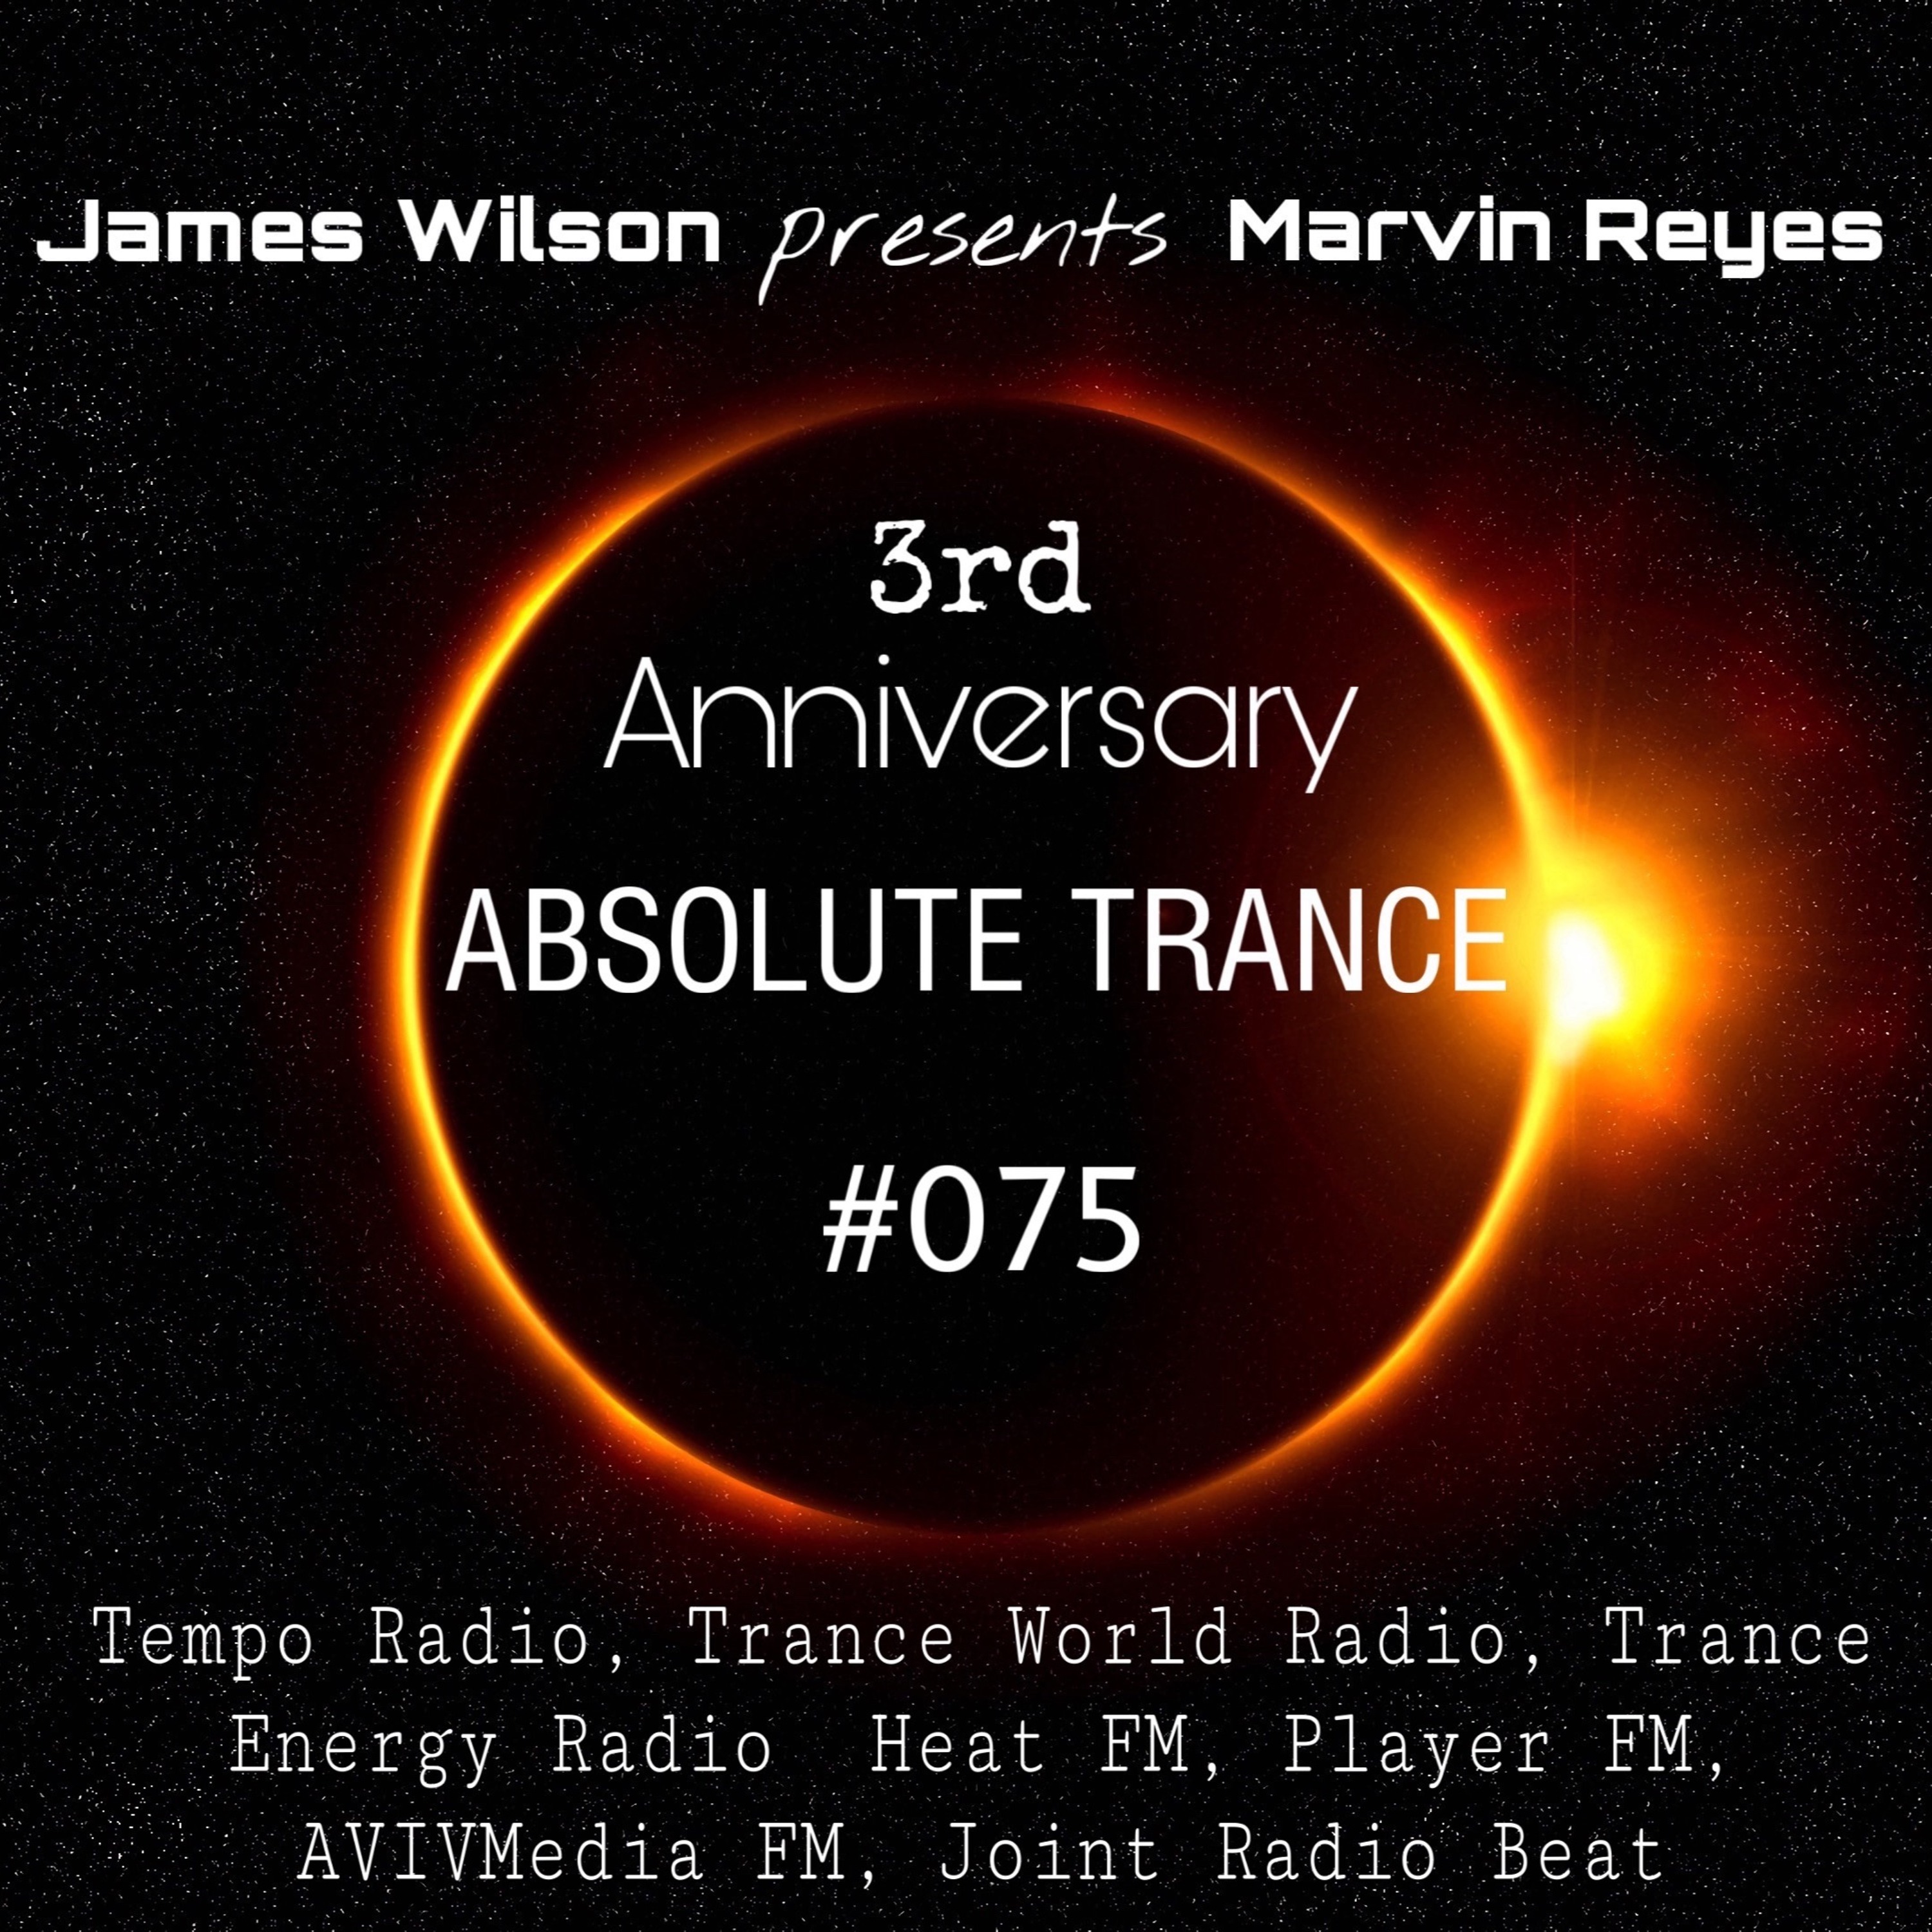 Absolute Trance #075